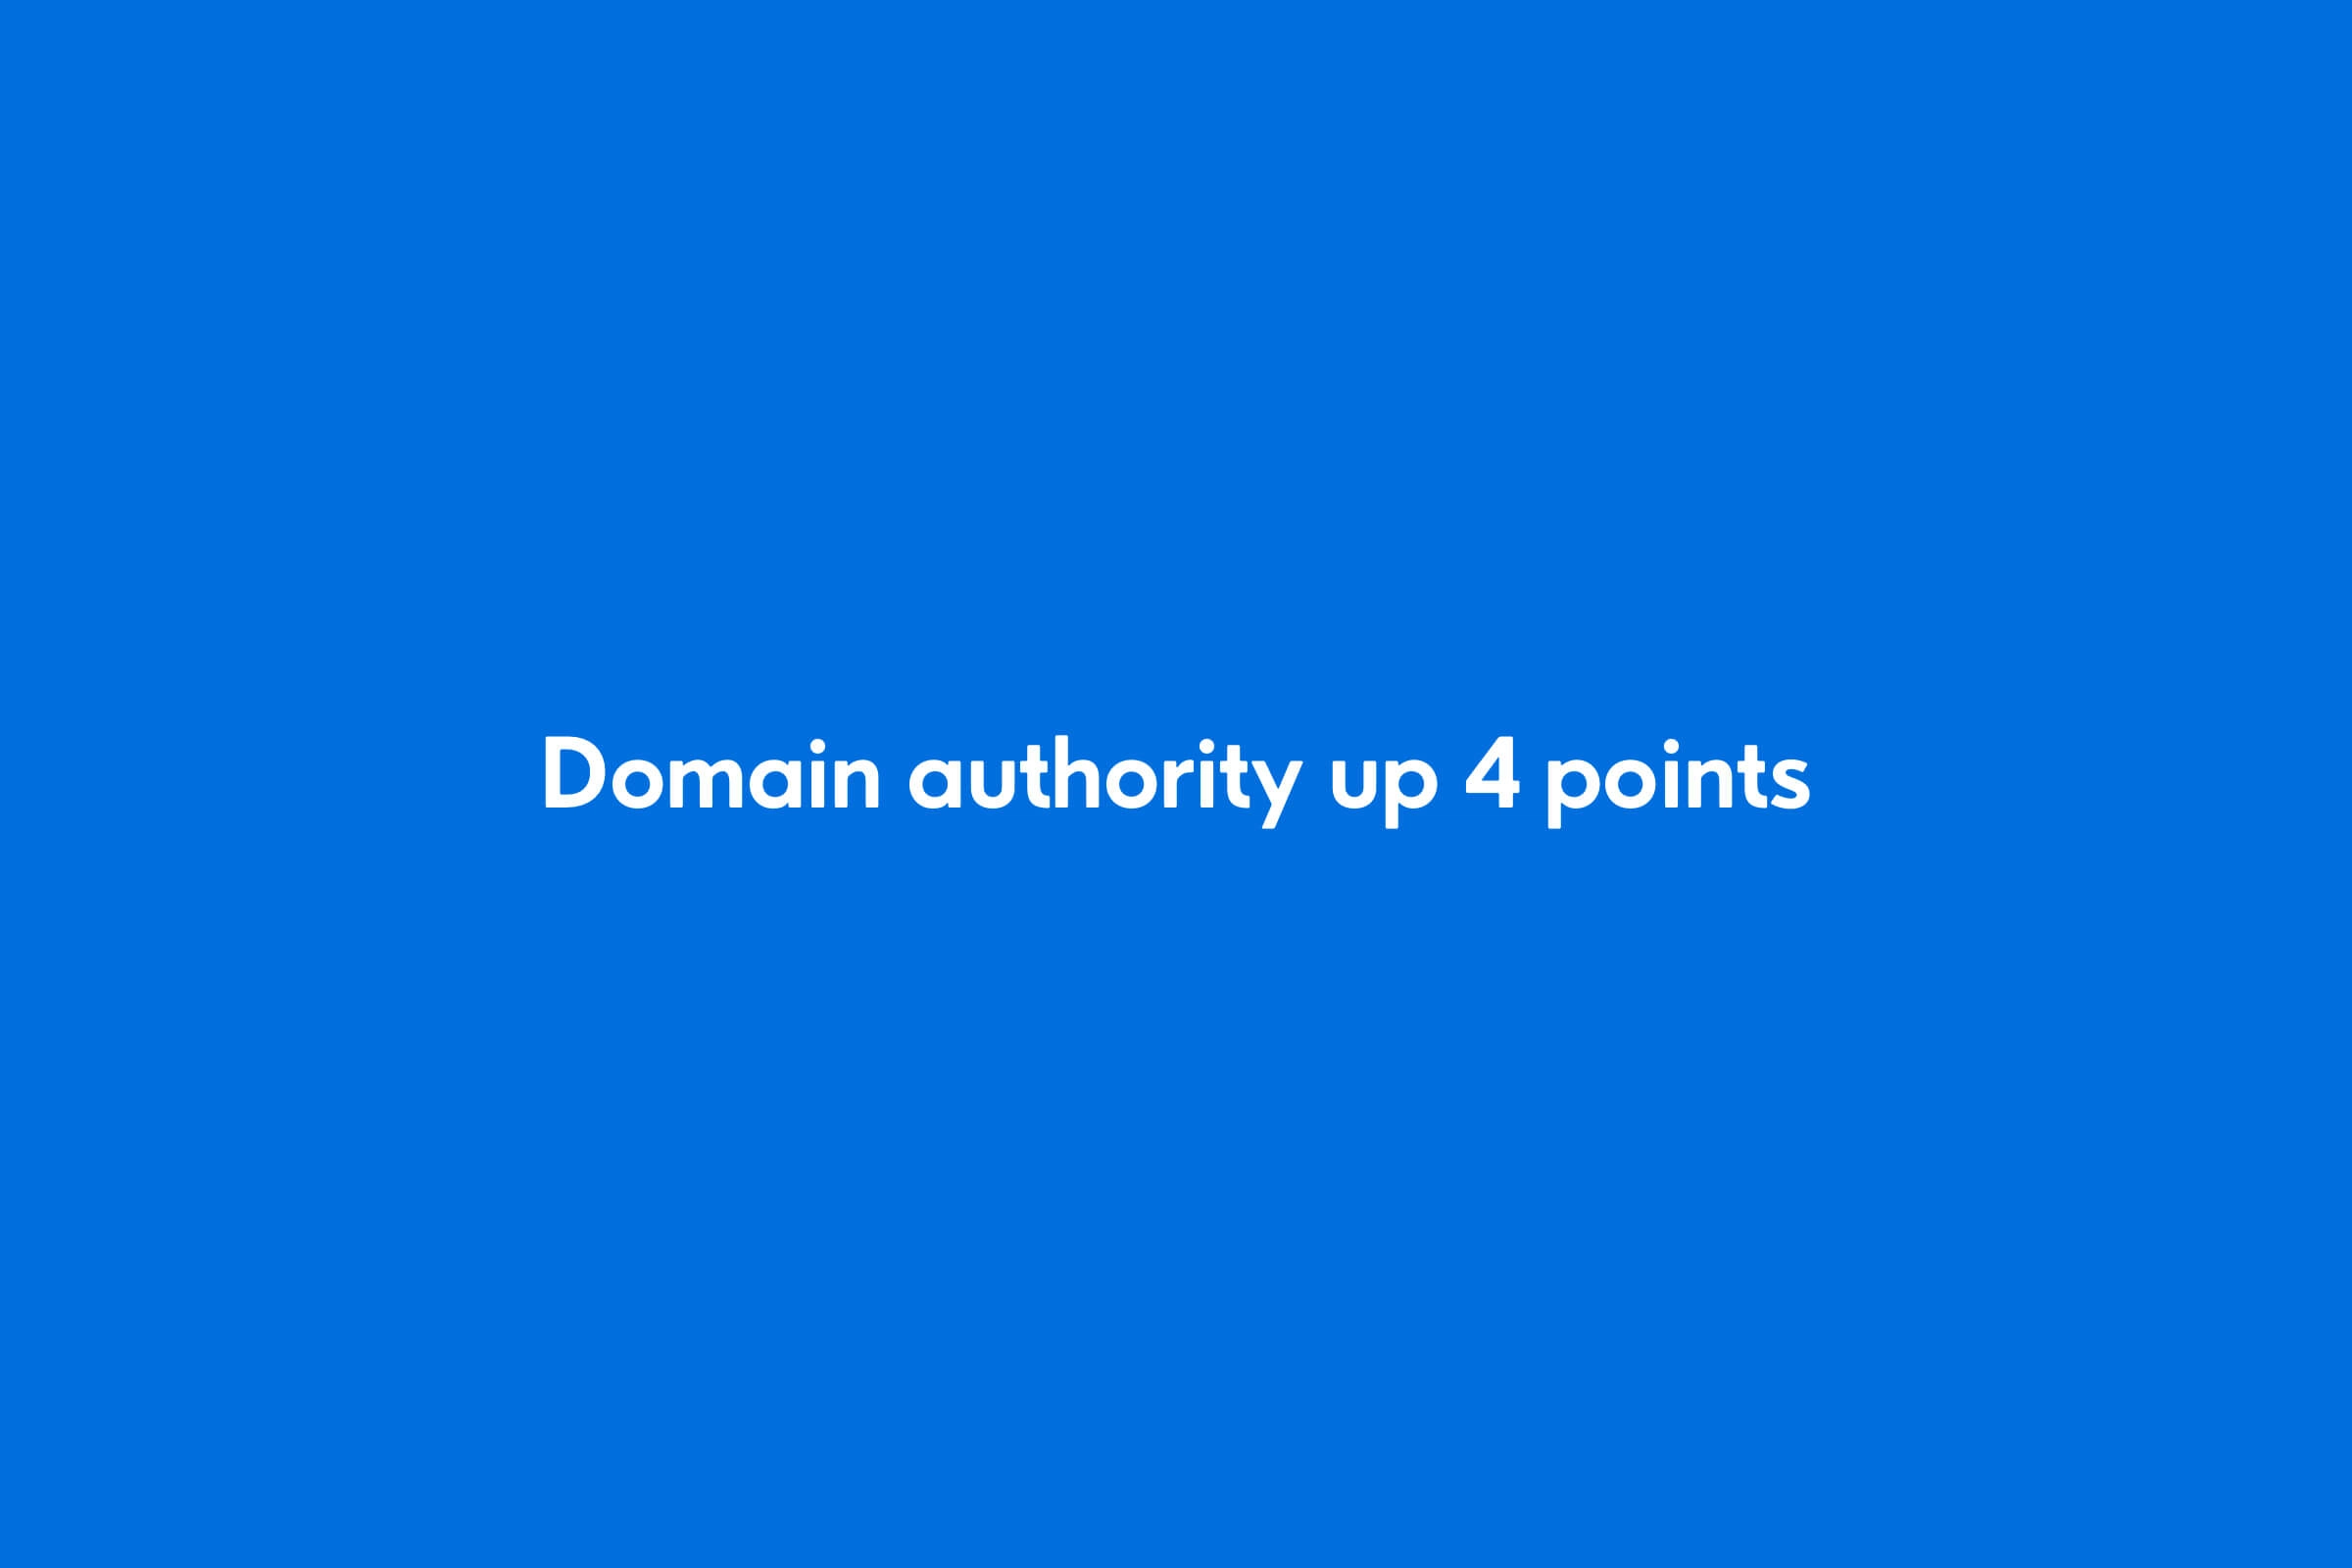 Domain authority up 4 points